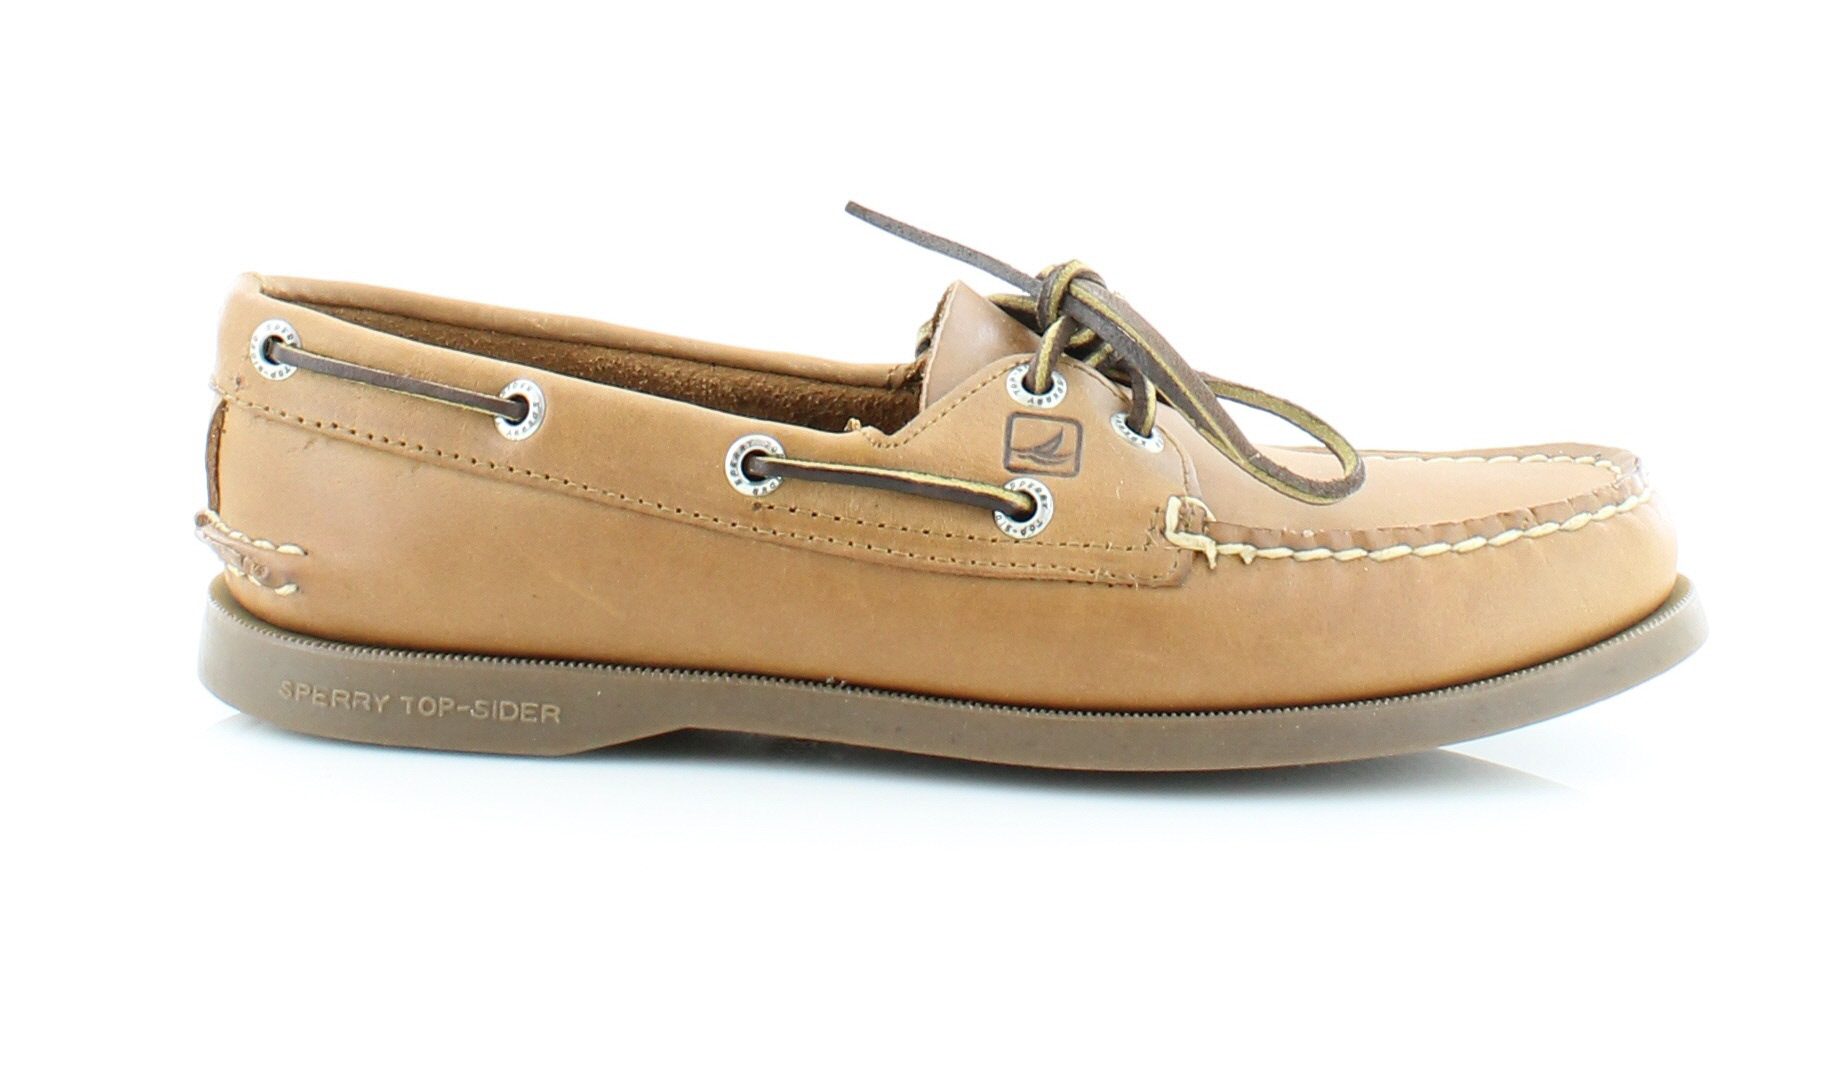 Sperry Top-Sider A/O 2-Eye Women's Loafers & Slip-Ons - image 3 of 5